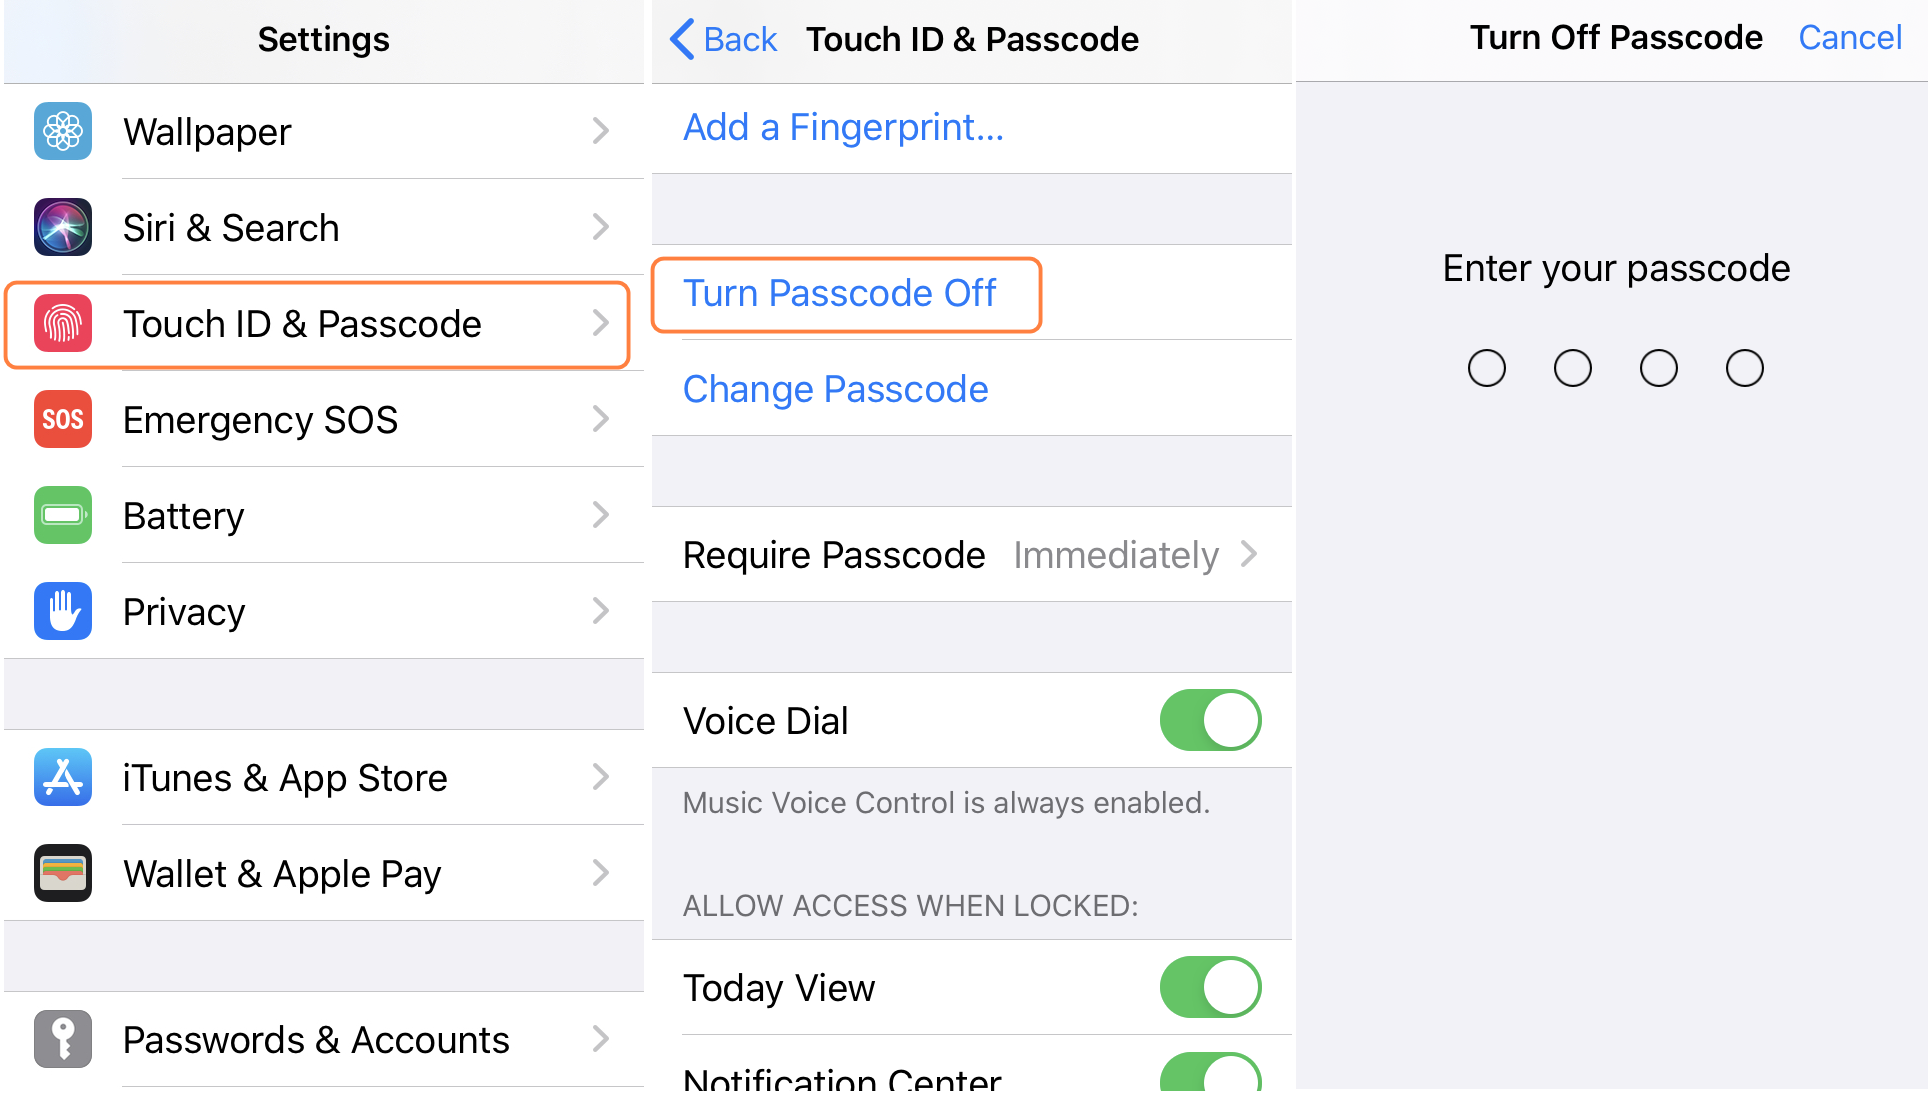 turn off passode on ipad with settings